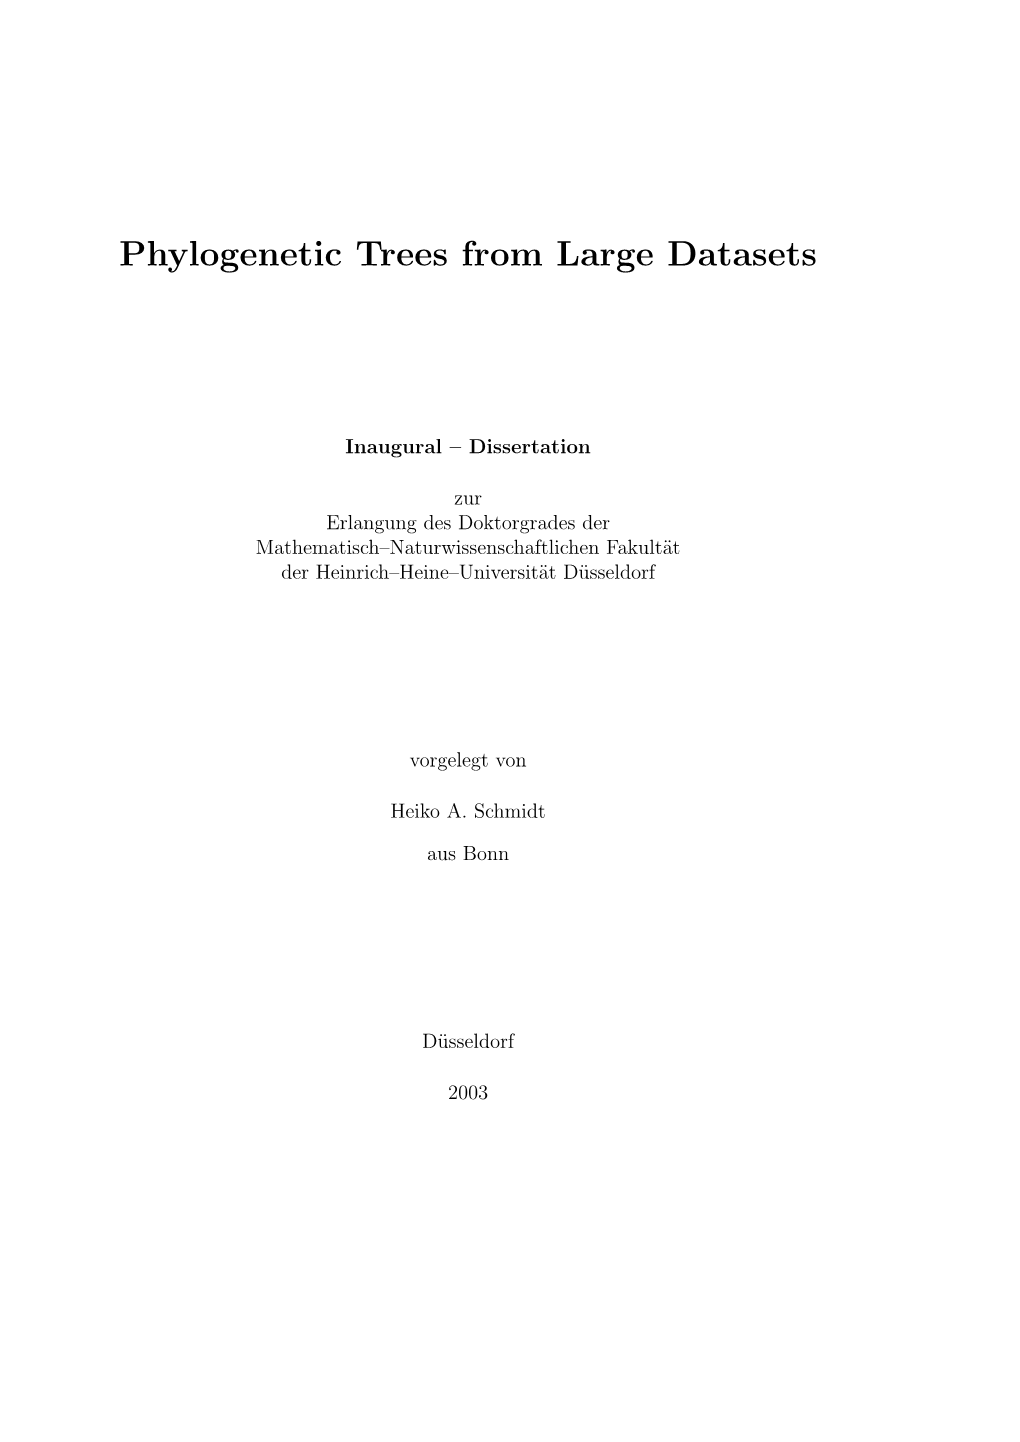 Phylogenetic Trees from Large Datasets